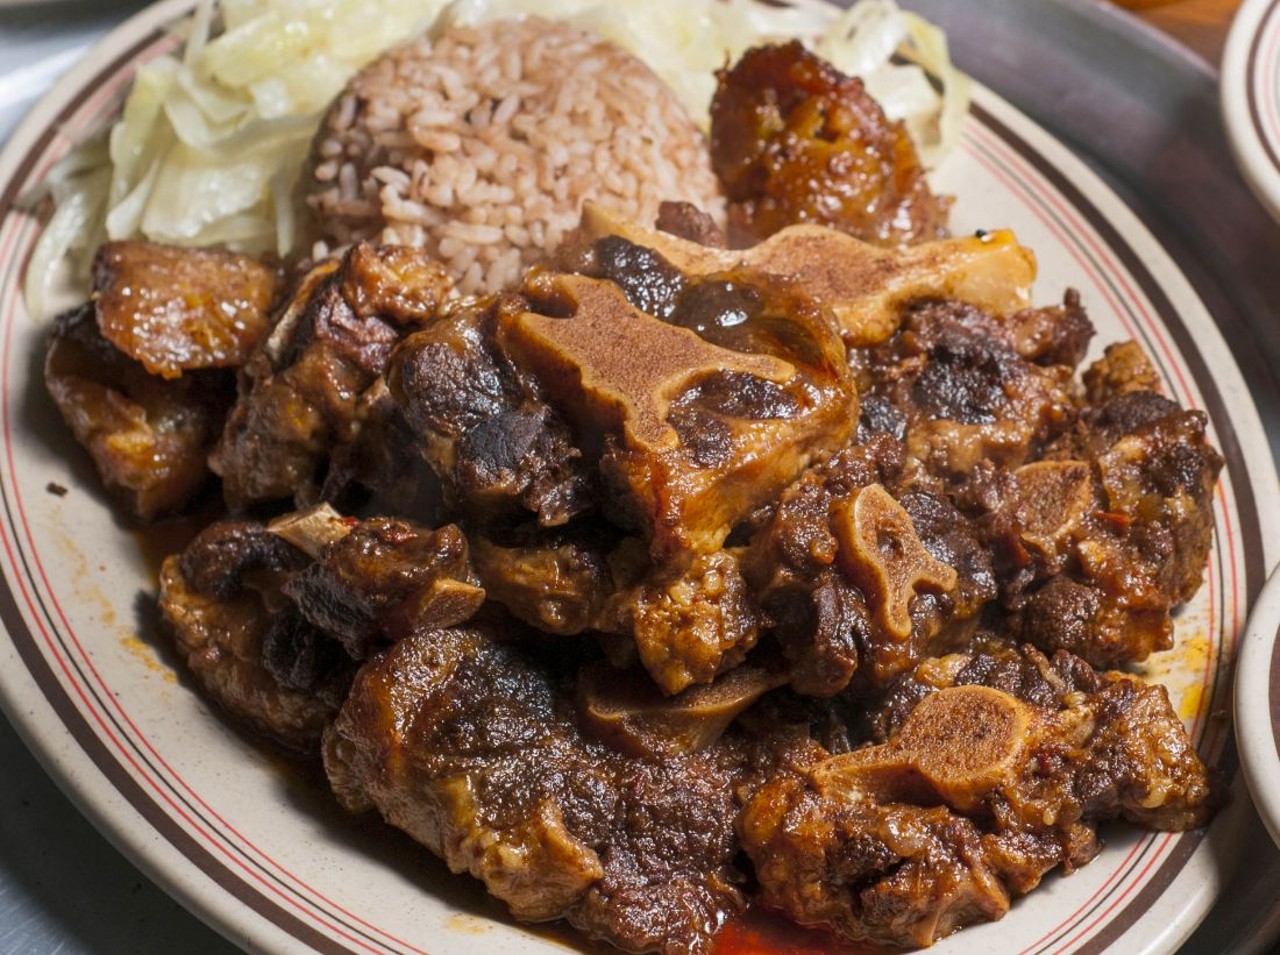 Jamaican oxtail from Rono's.